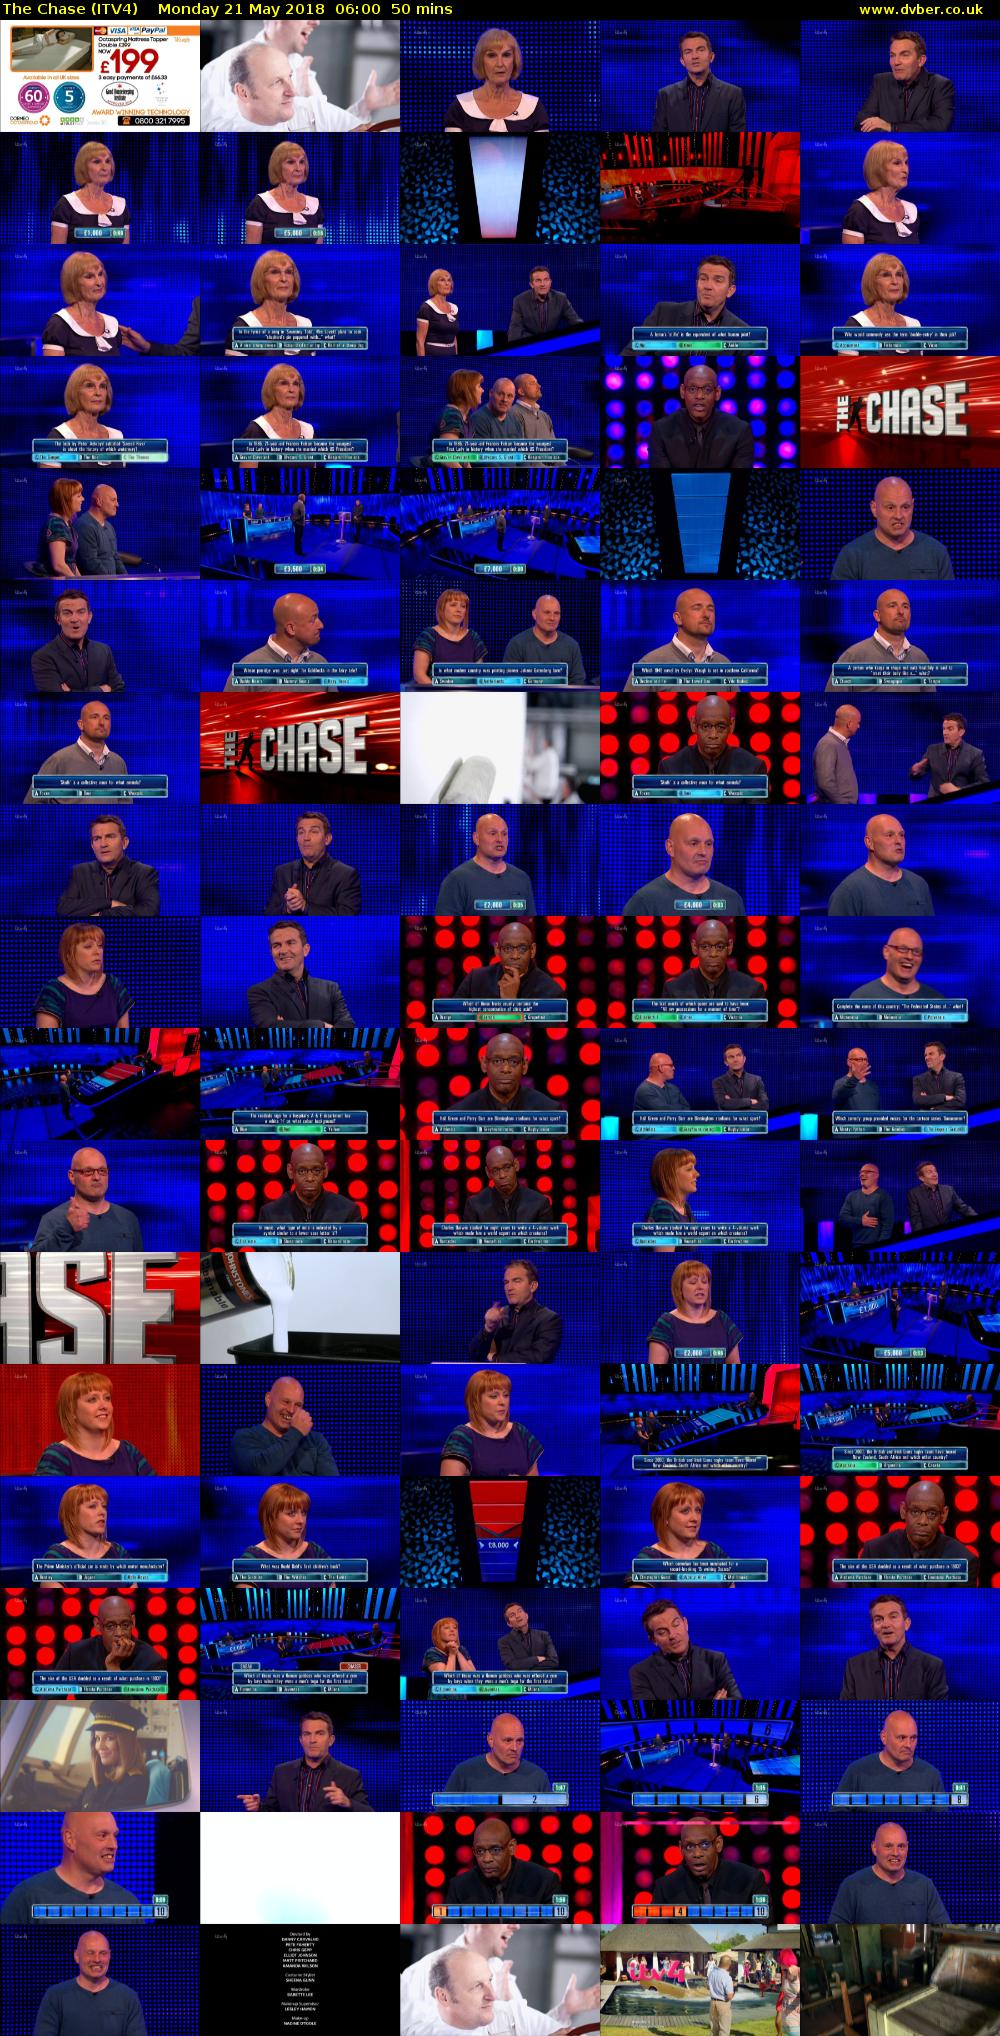 The Chase (ITV4) Monday 21 May 2018 06:00 - 06:50